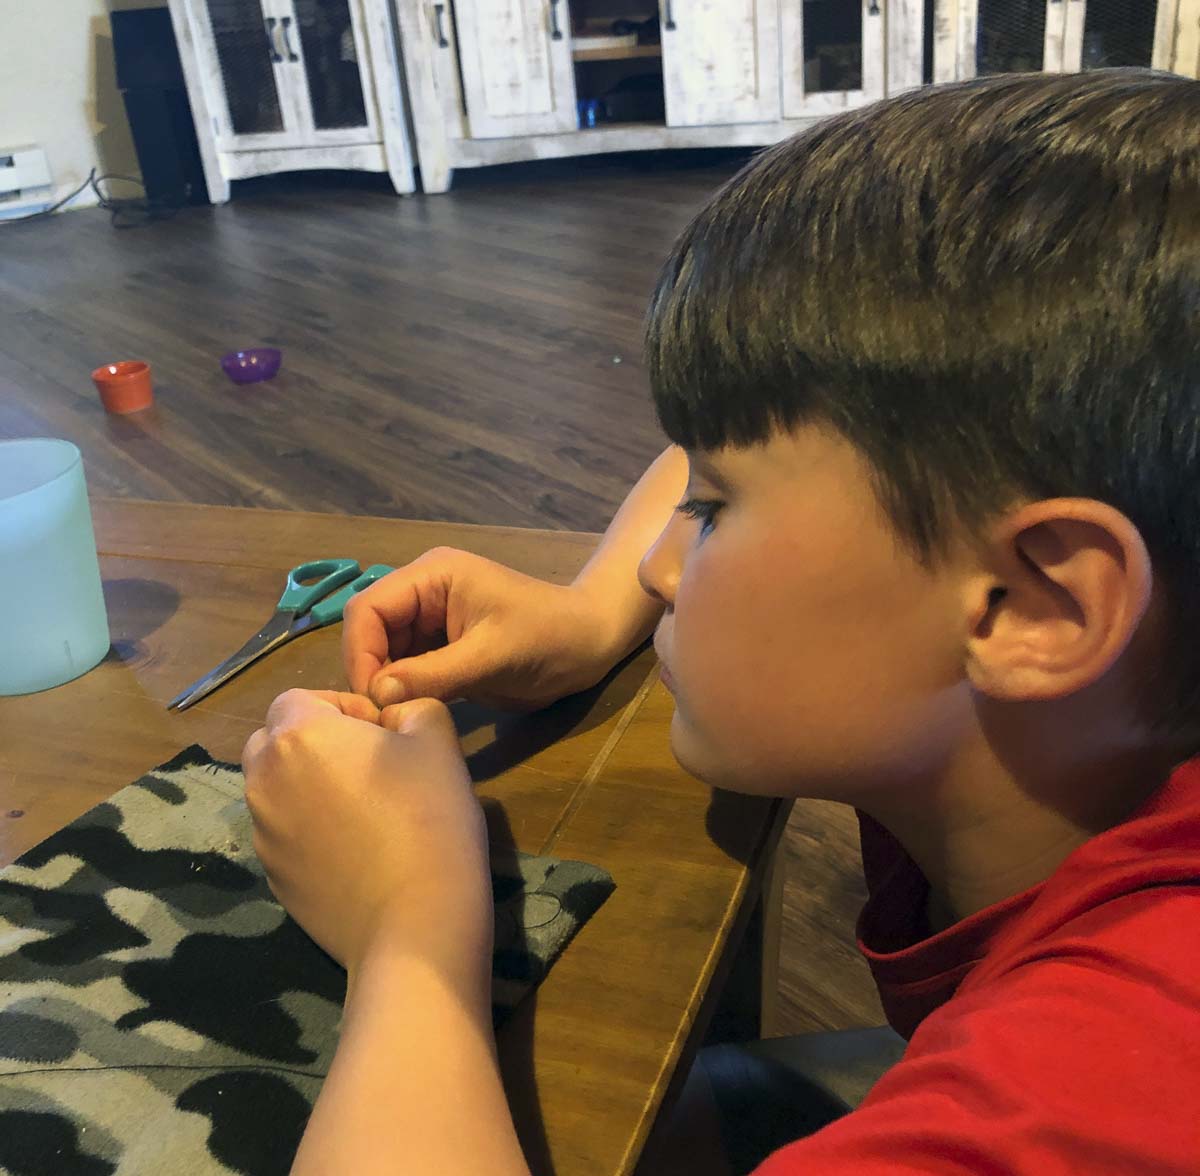 Logan Gnade, a 4th grader at North Fork Elementary School, used math and sewing to design patterns and sew face masks for friends and family. Photo courtesy of Woodland Public Schools